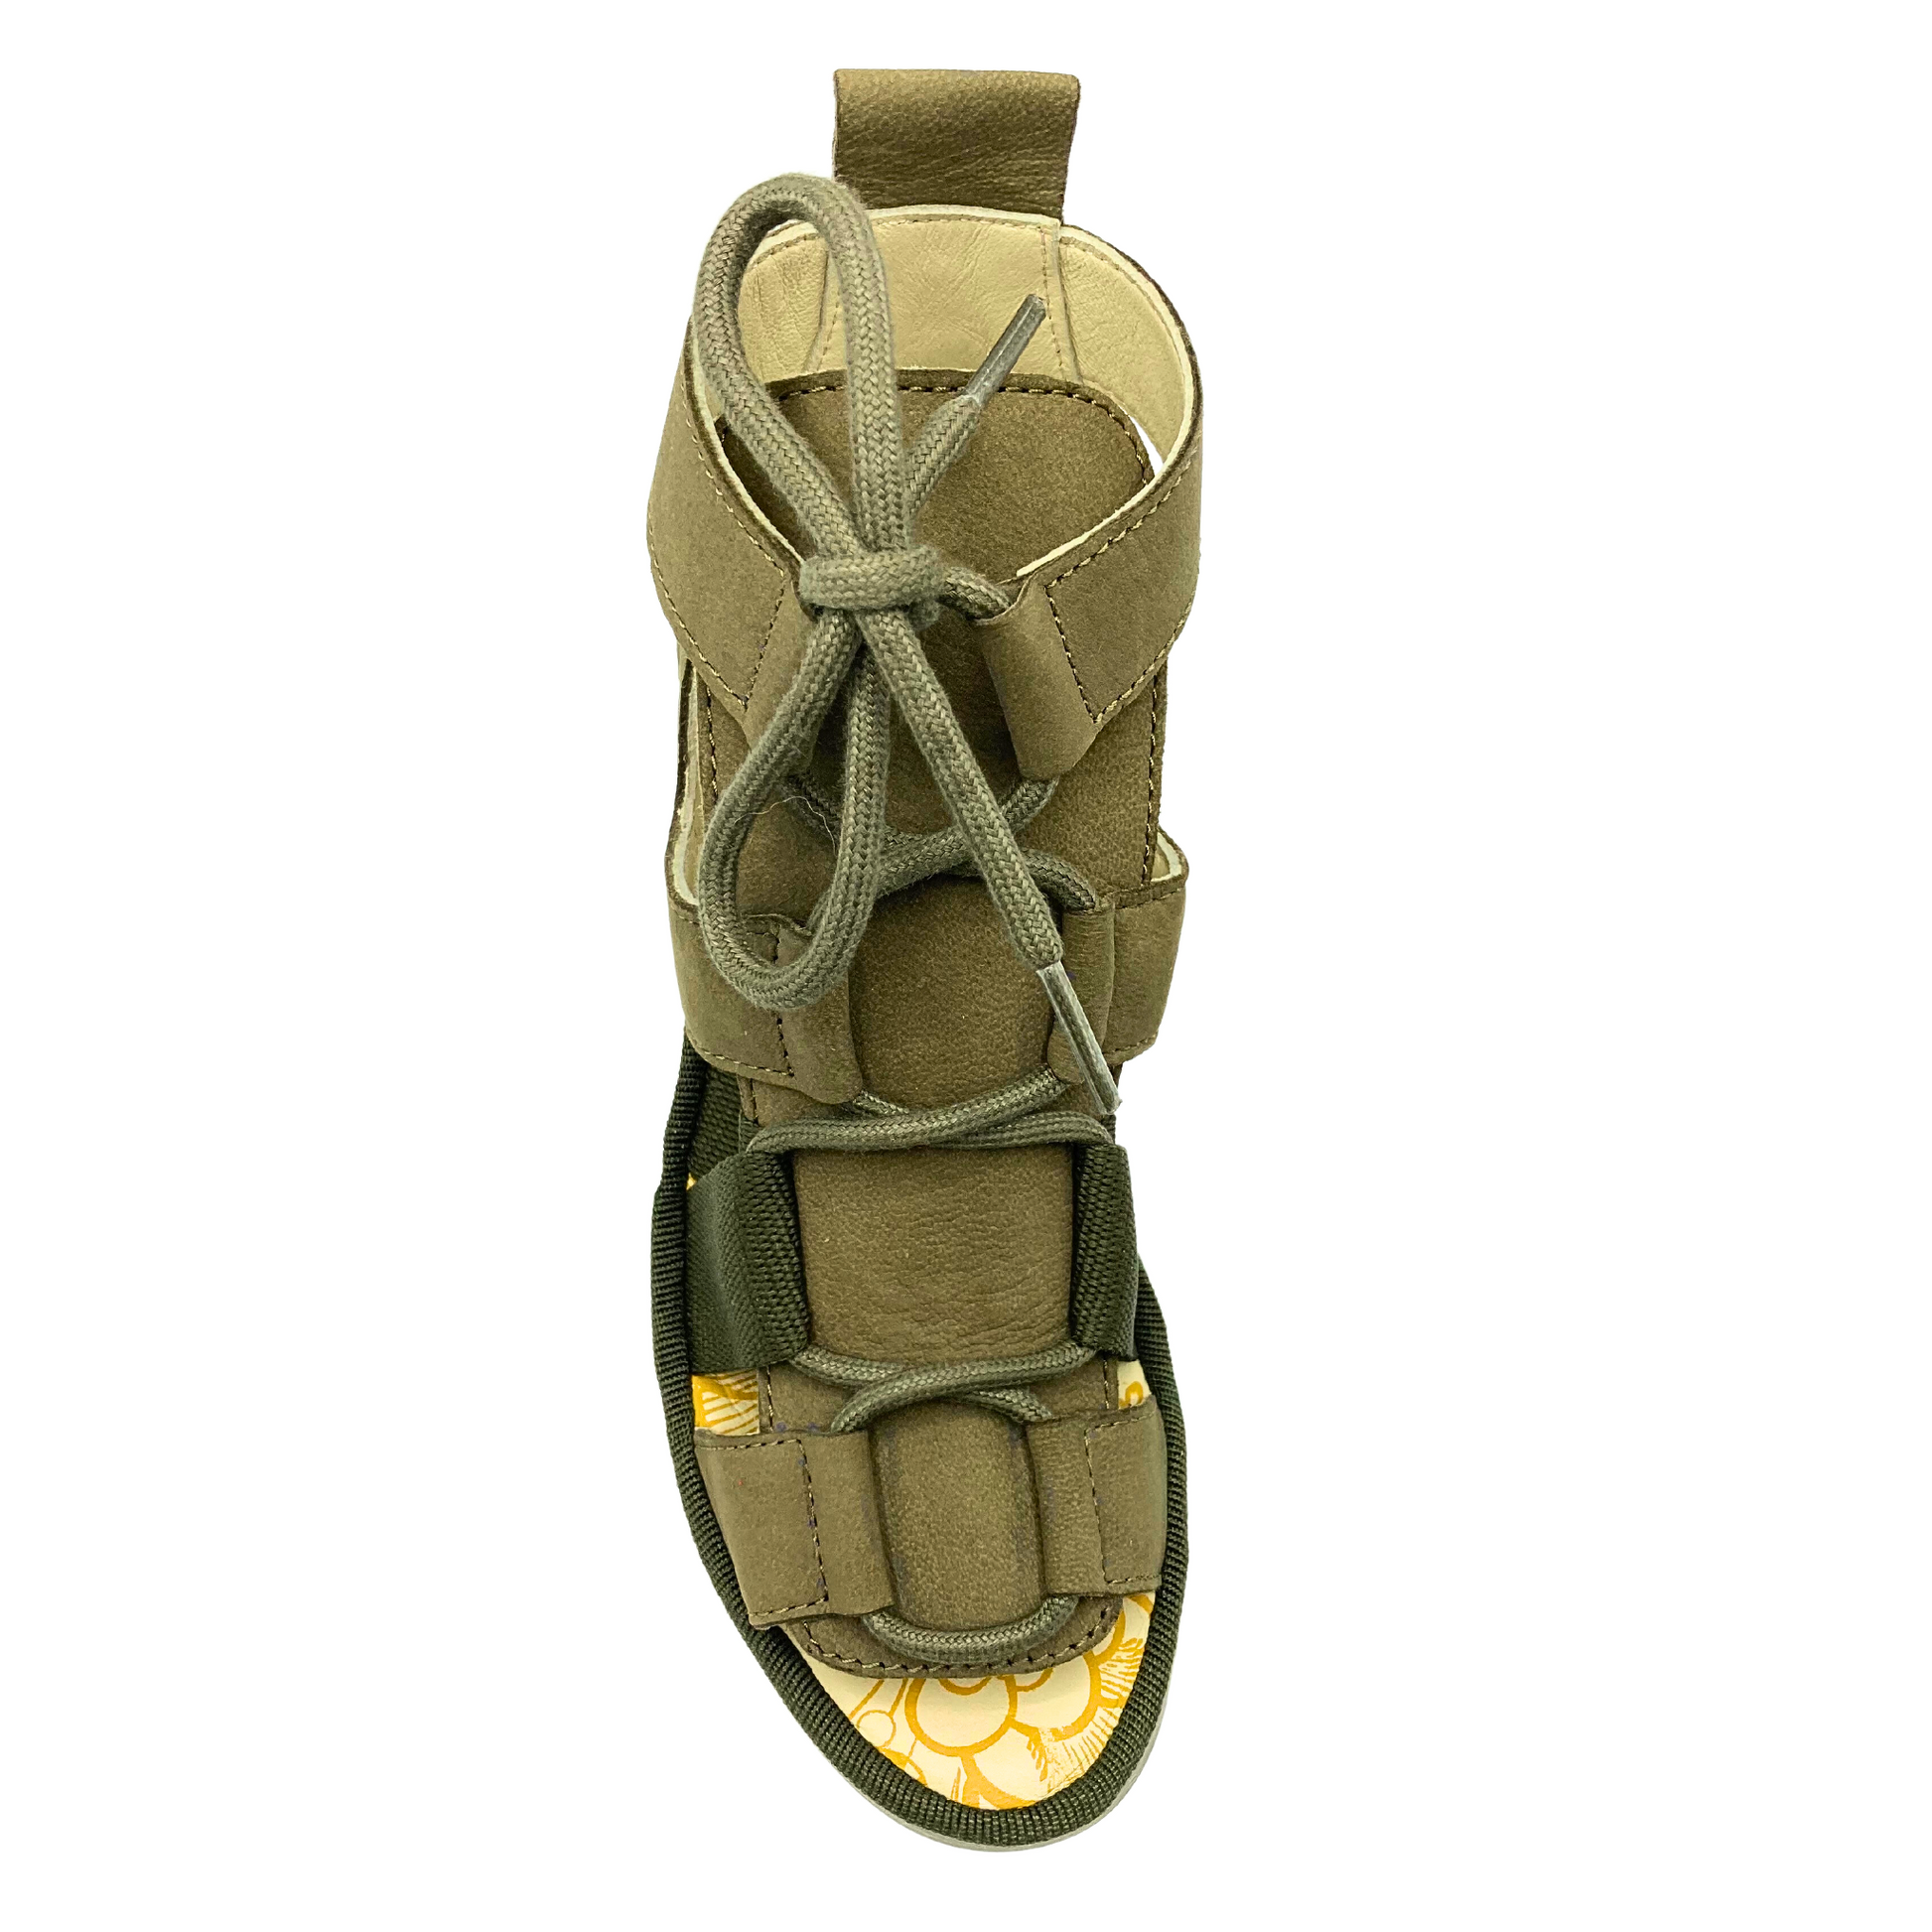 Top down view of Gladiator style sandal.  Two-tone straps and thick laces up the front